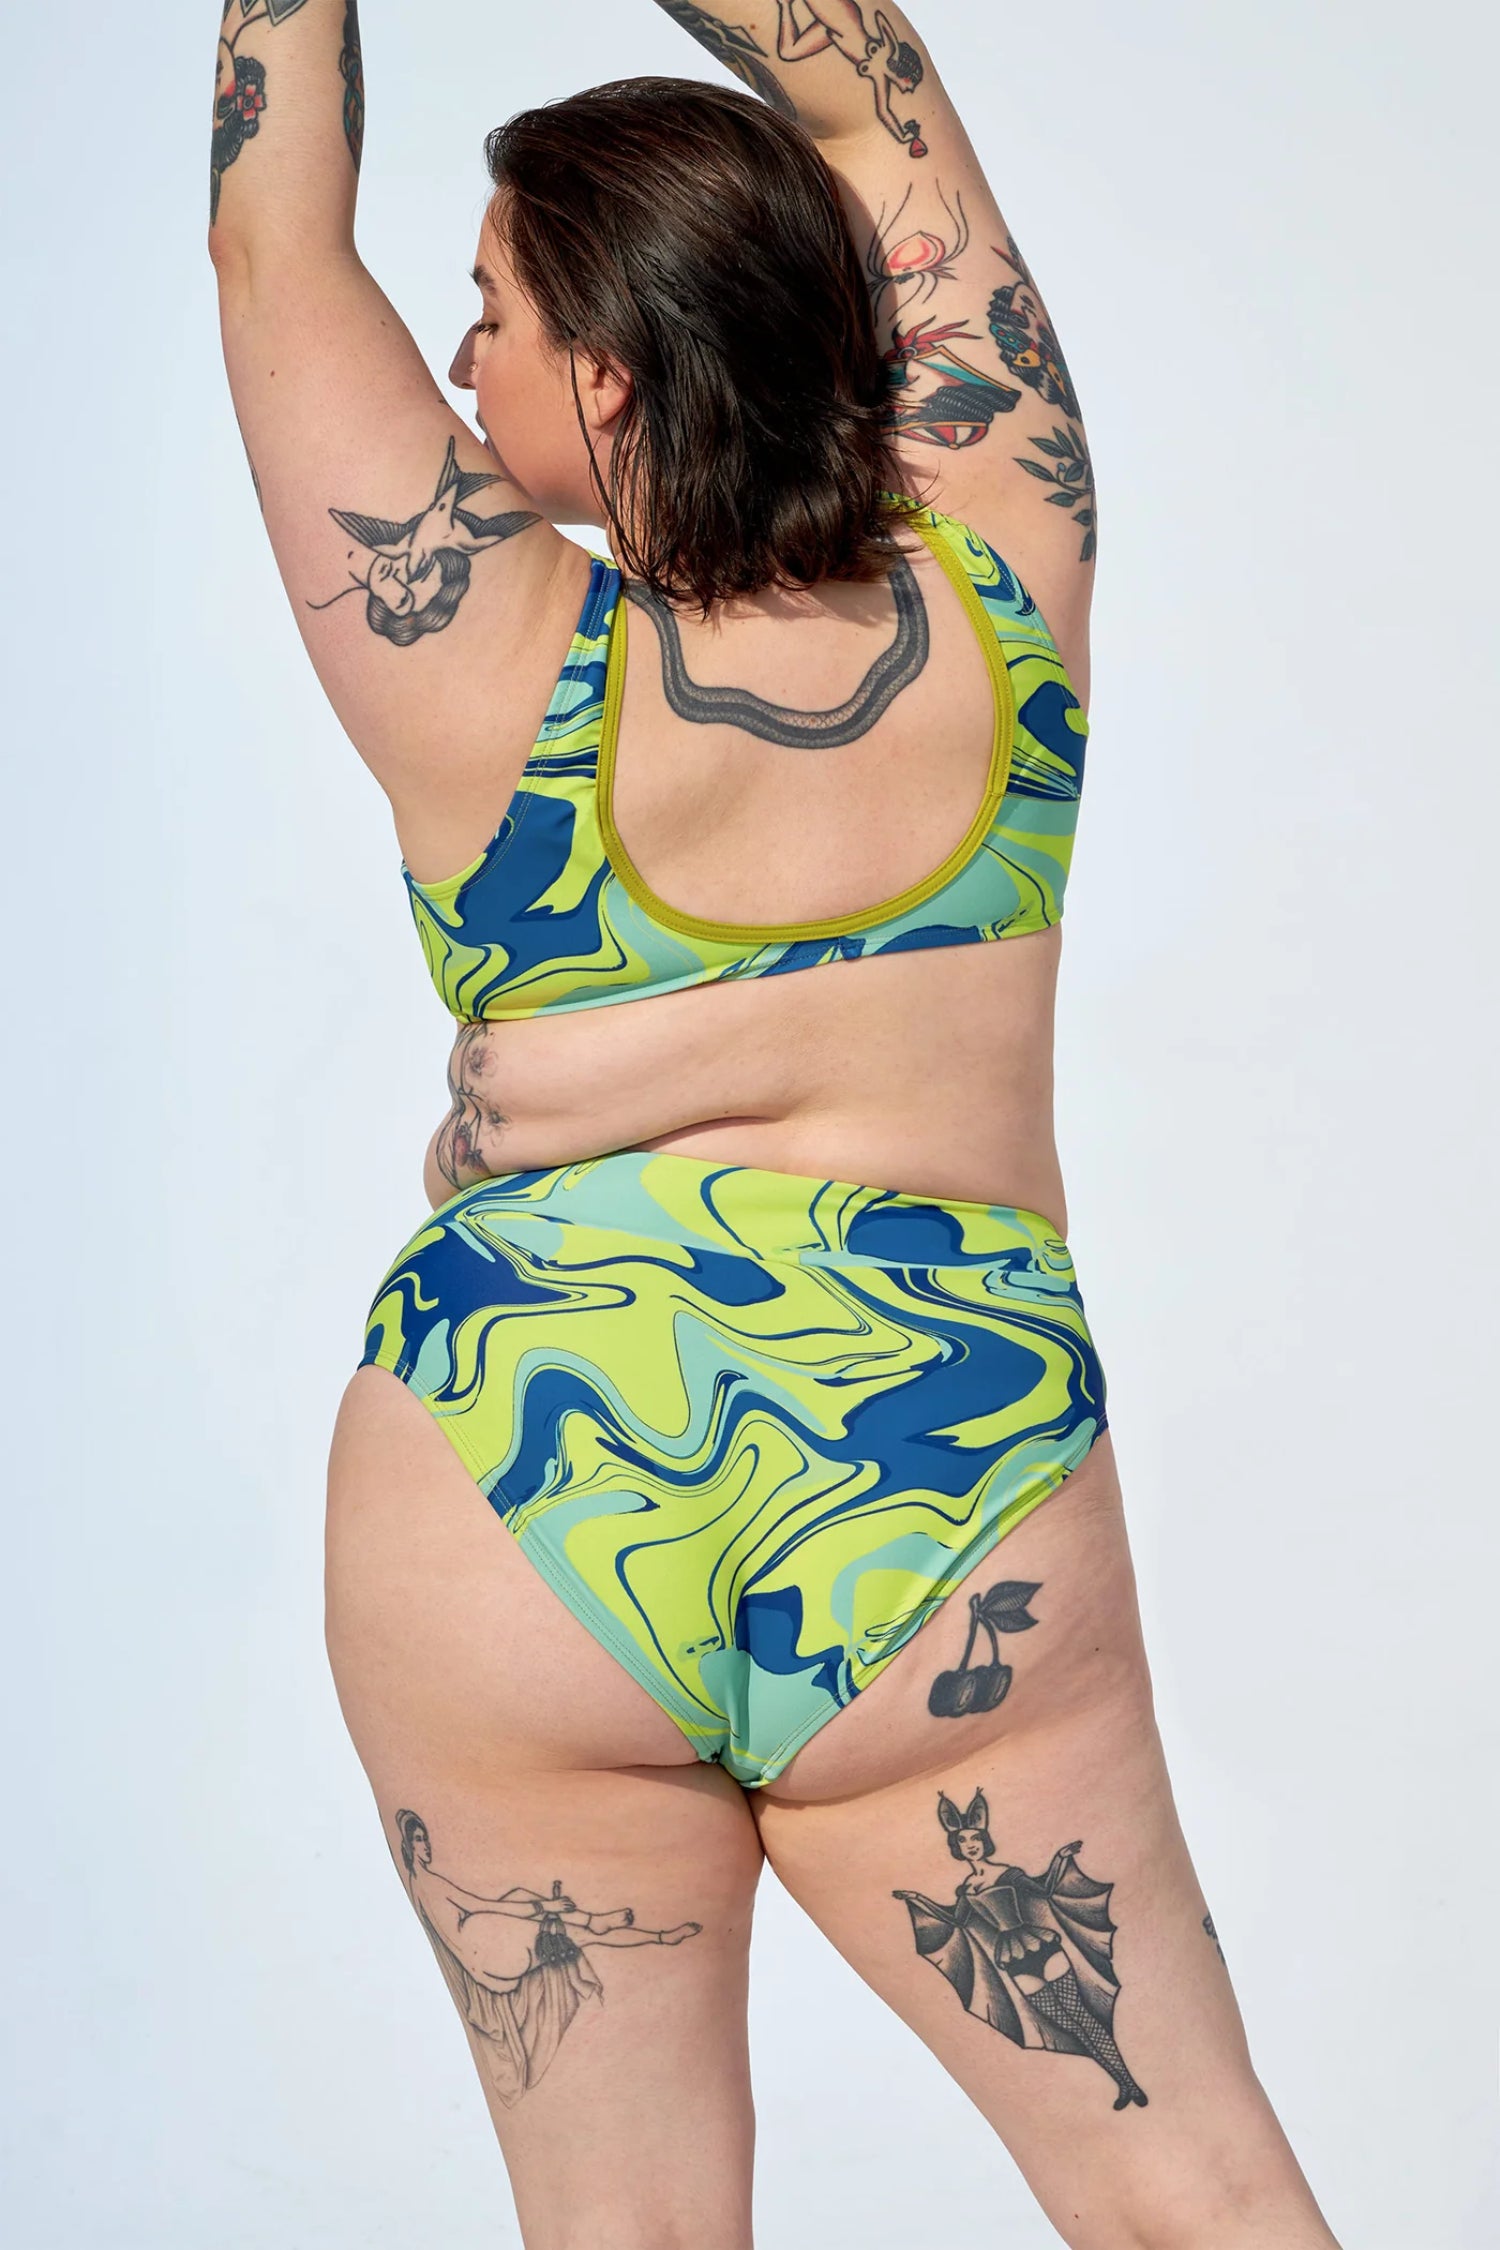 Analie HIgh Waist Bikini Bottom by Selfish Swimwear, Green Marble Swirls, back view, high waist, high cut leg, fully lined, recycled fibres, UV protection, sizes XS to XXL, made in Montreal